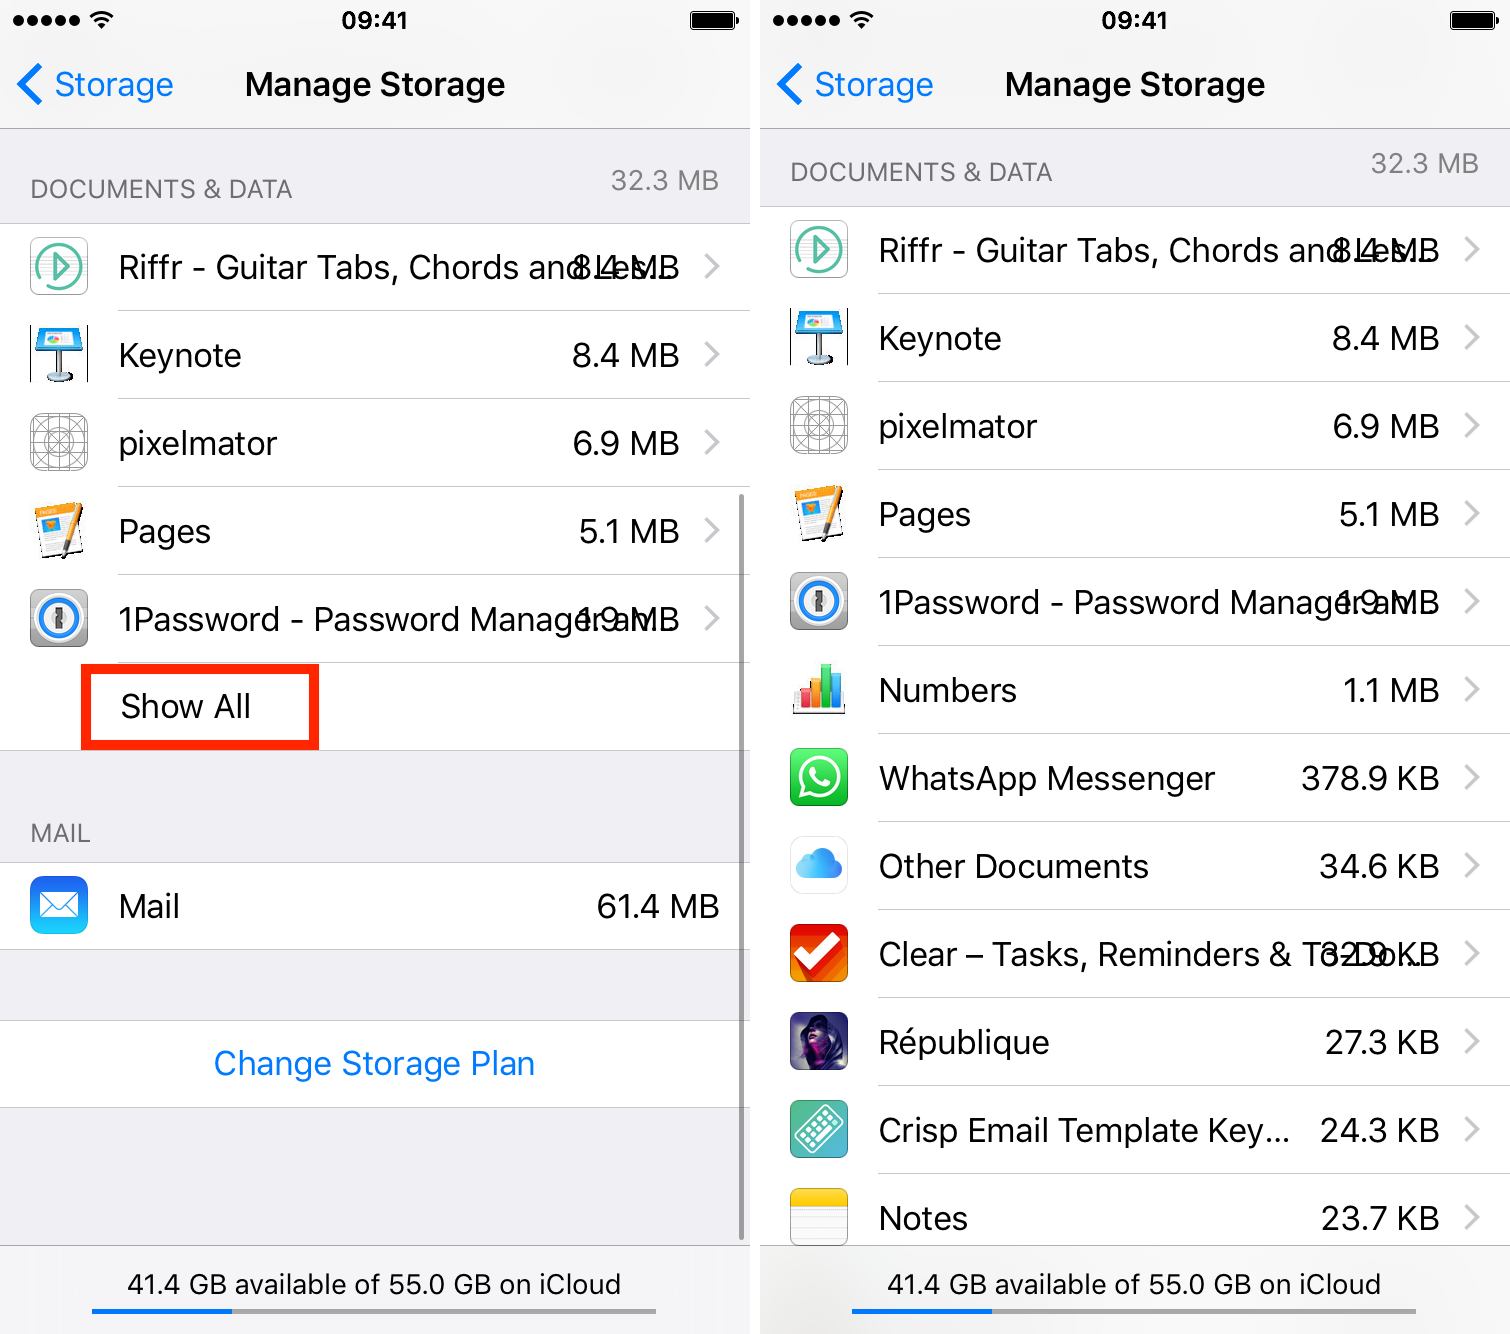 What to do when there is not enough iCloud storage to backup your iPhone